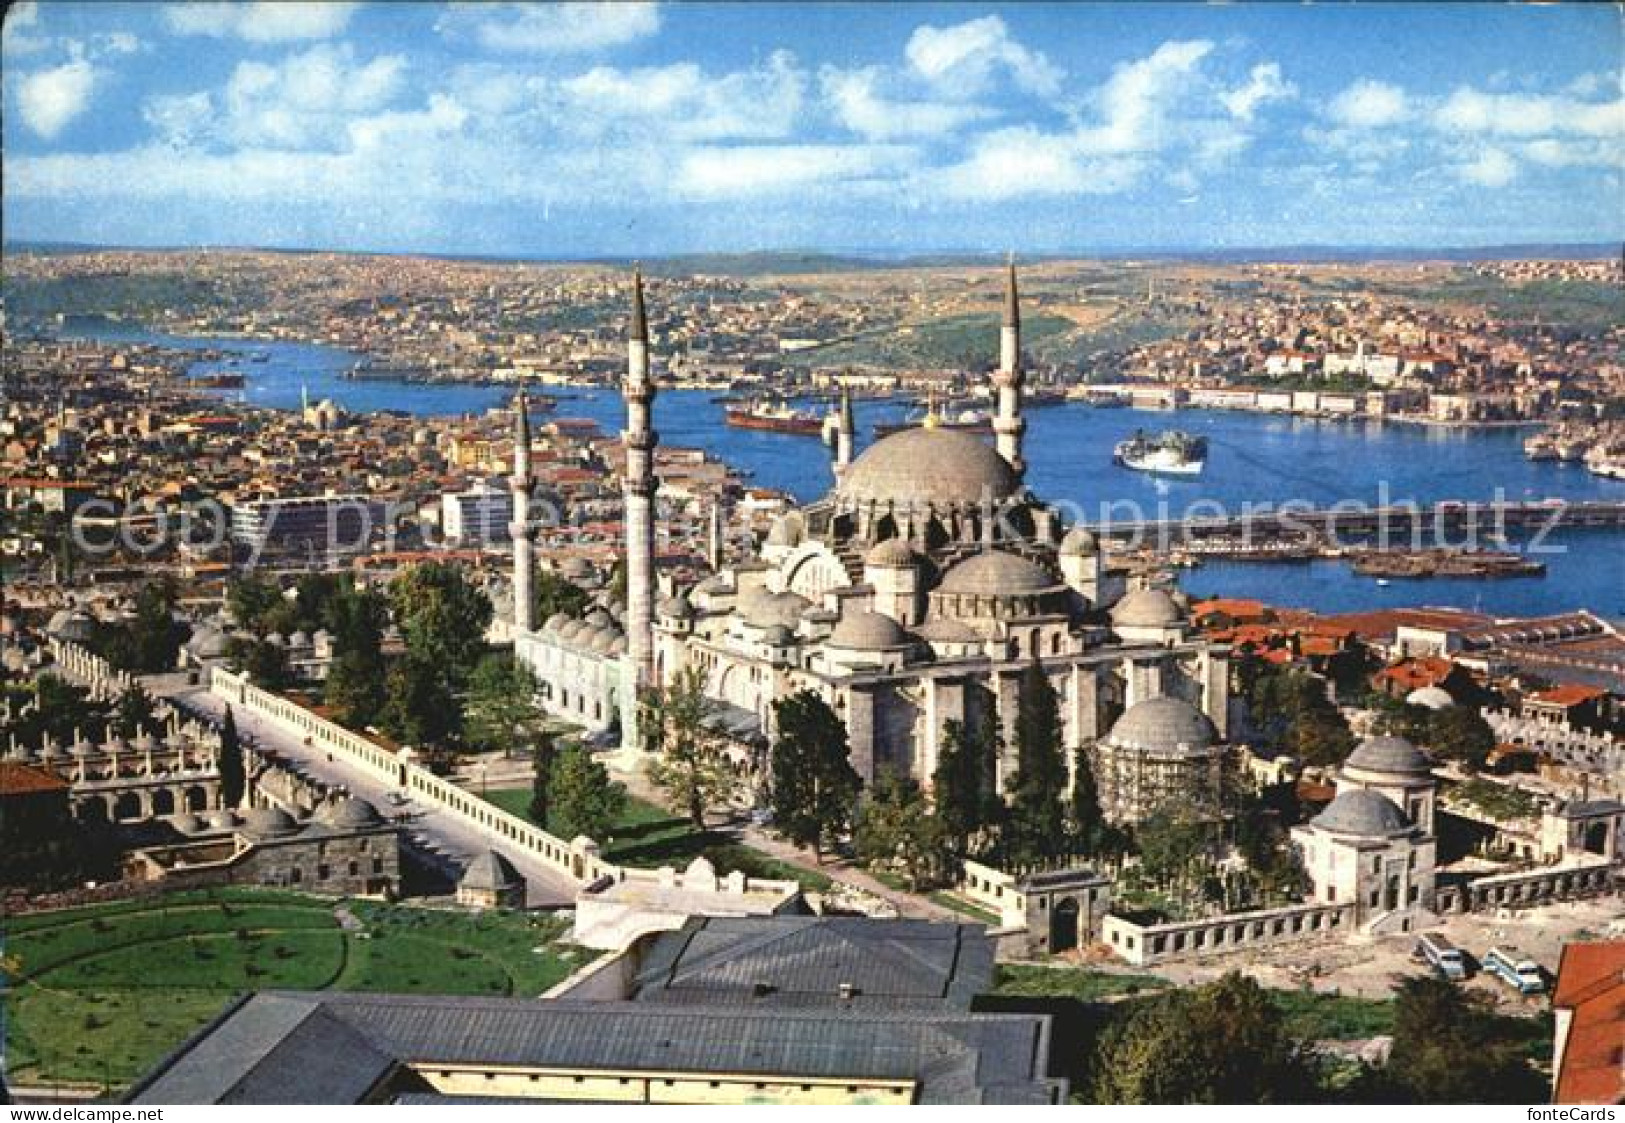 72512960 Istanbul Constantinopel The Mosque Of Soliman The Magnificent And The G - Turquie